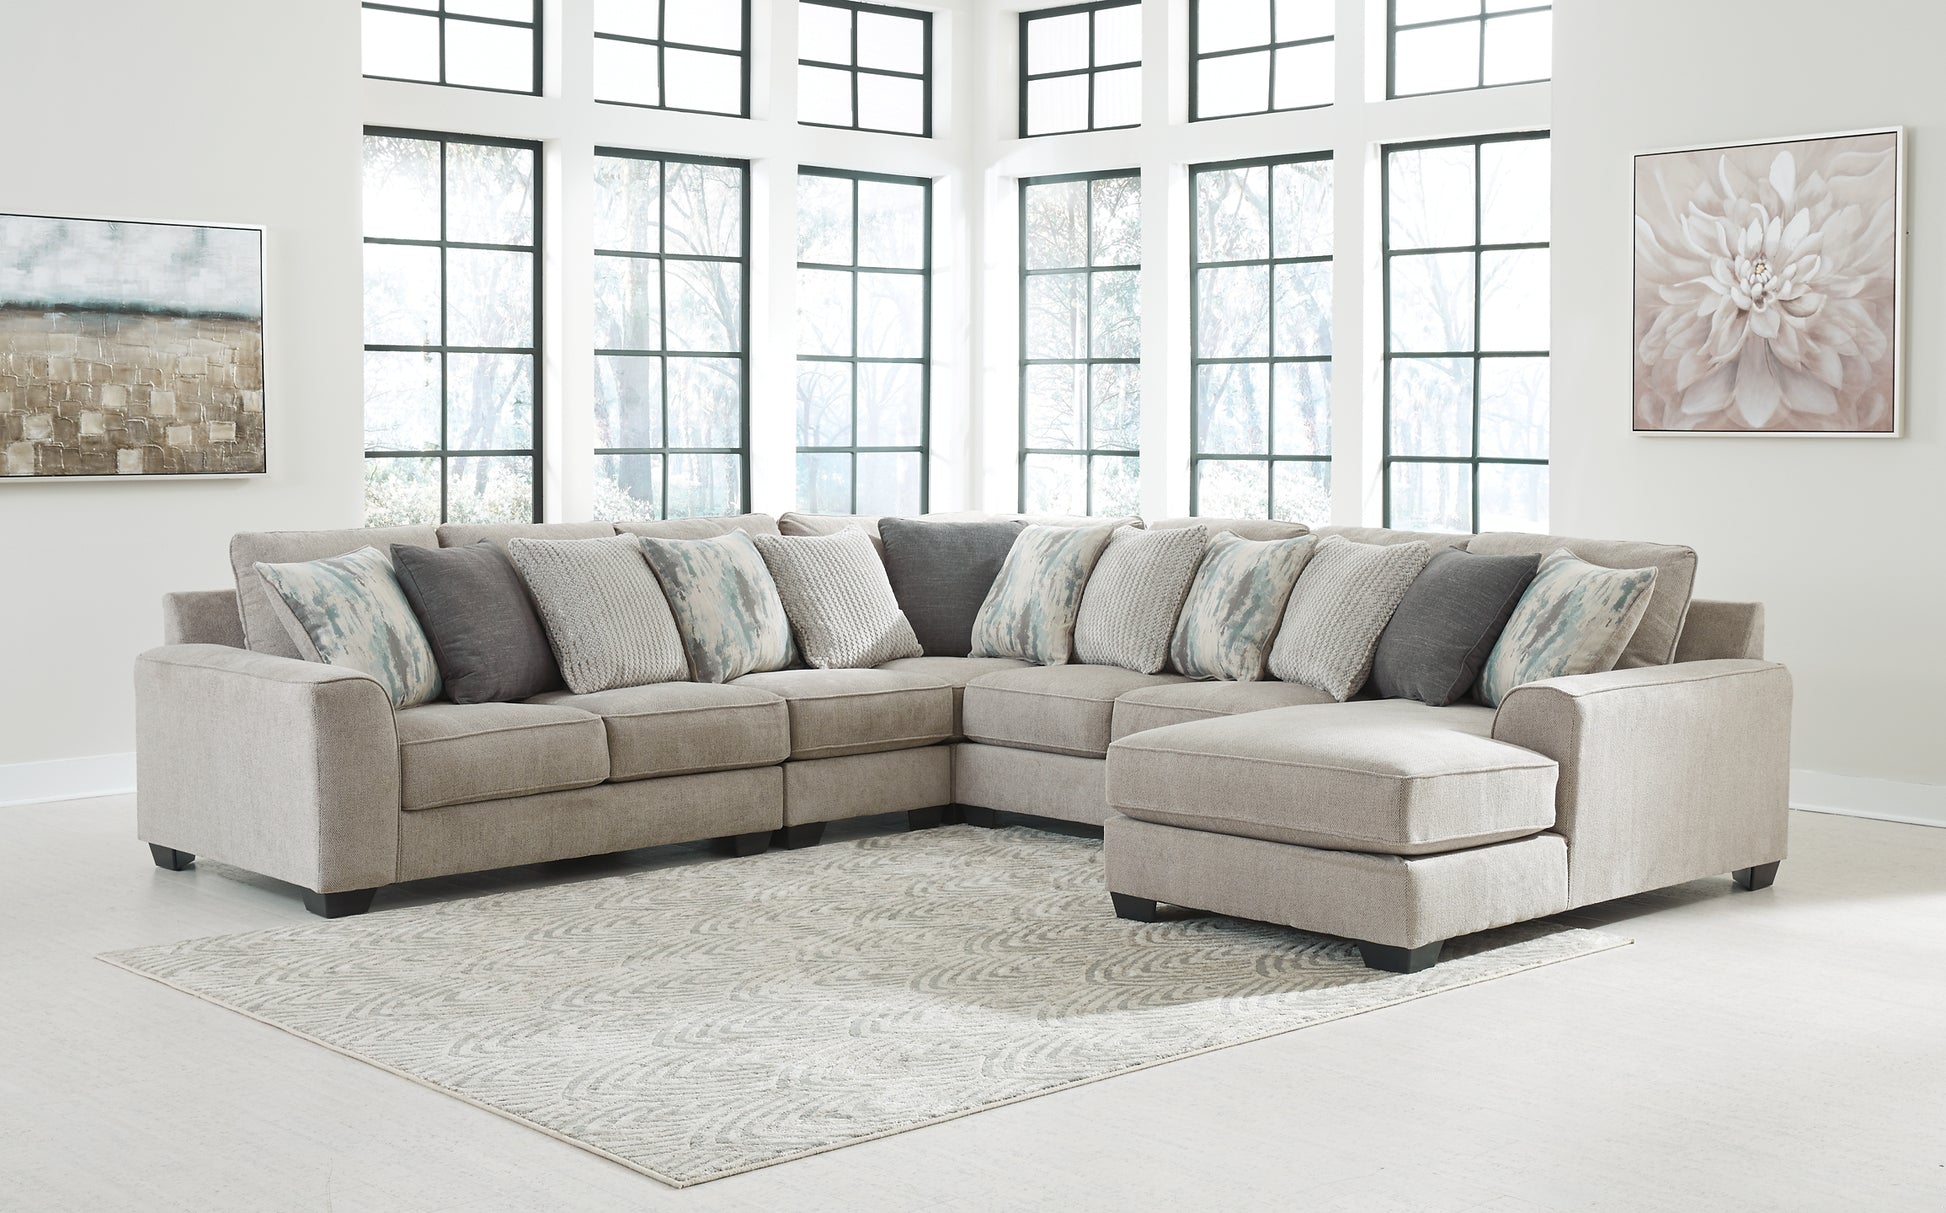 Ardsley 5-Piece Sectional with Chaise Wilson Furniture (OH)  in Bridgeport, Ohio. Serving Bridgeport, Yorkville, Bellaire, & Avondale